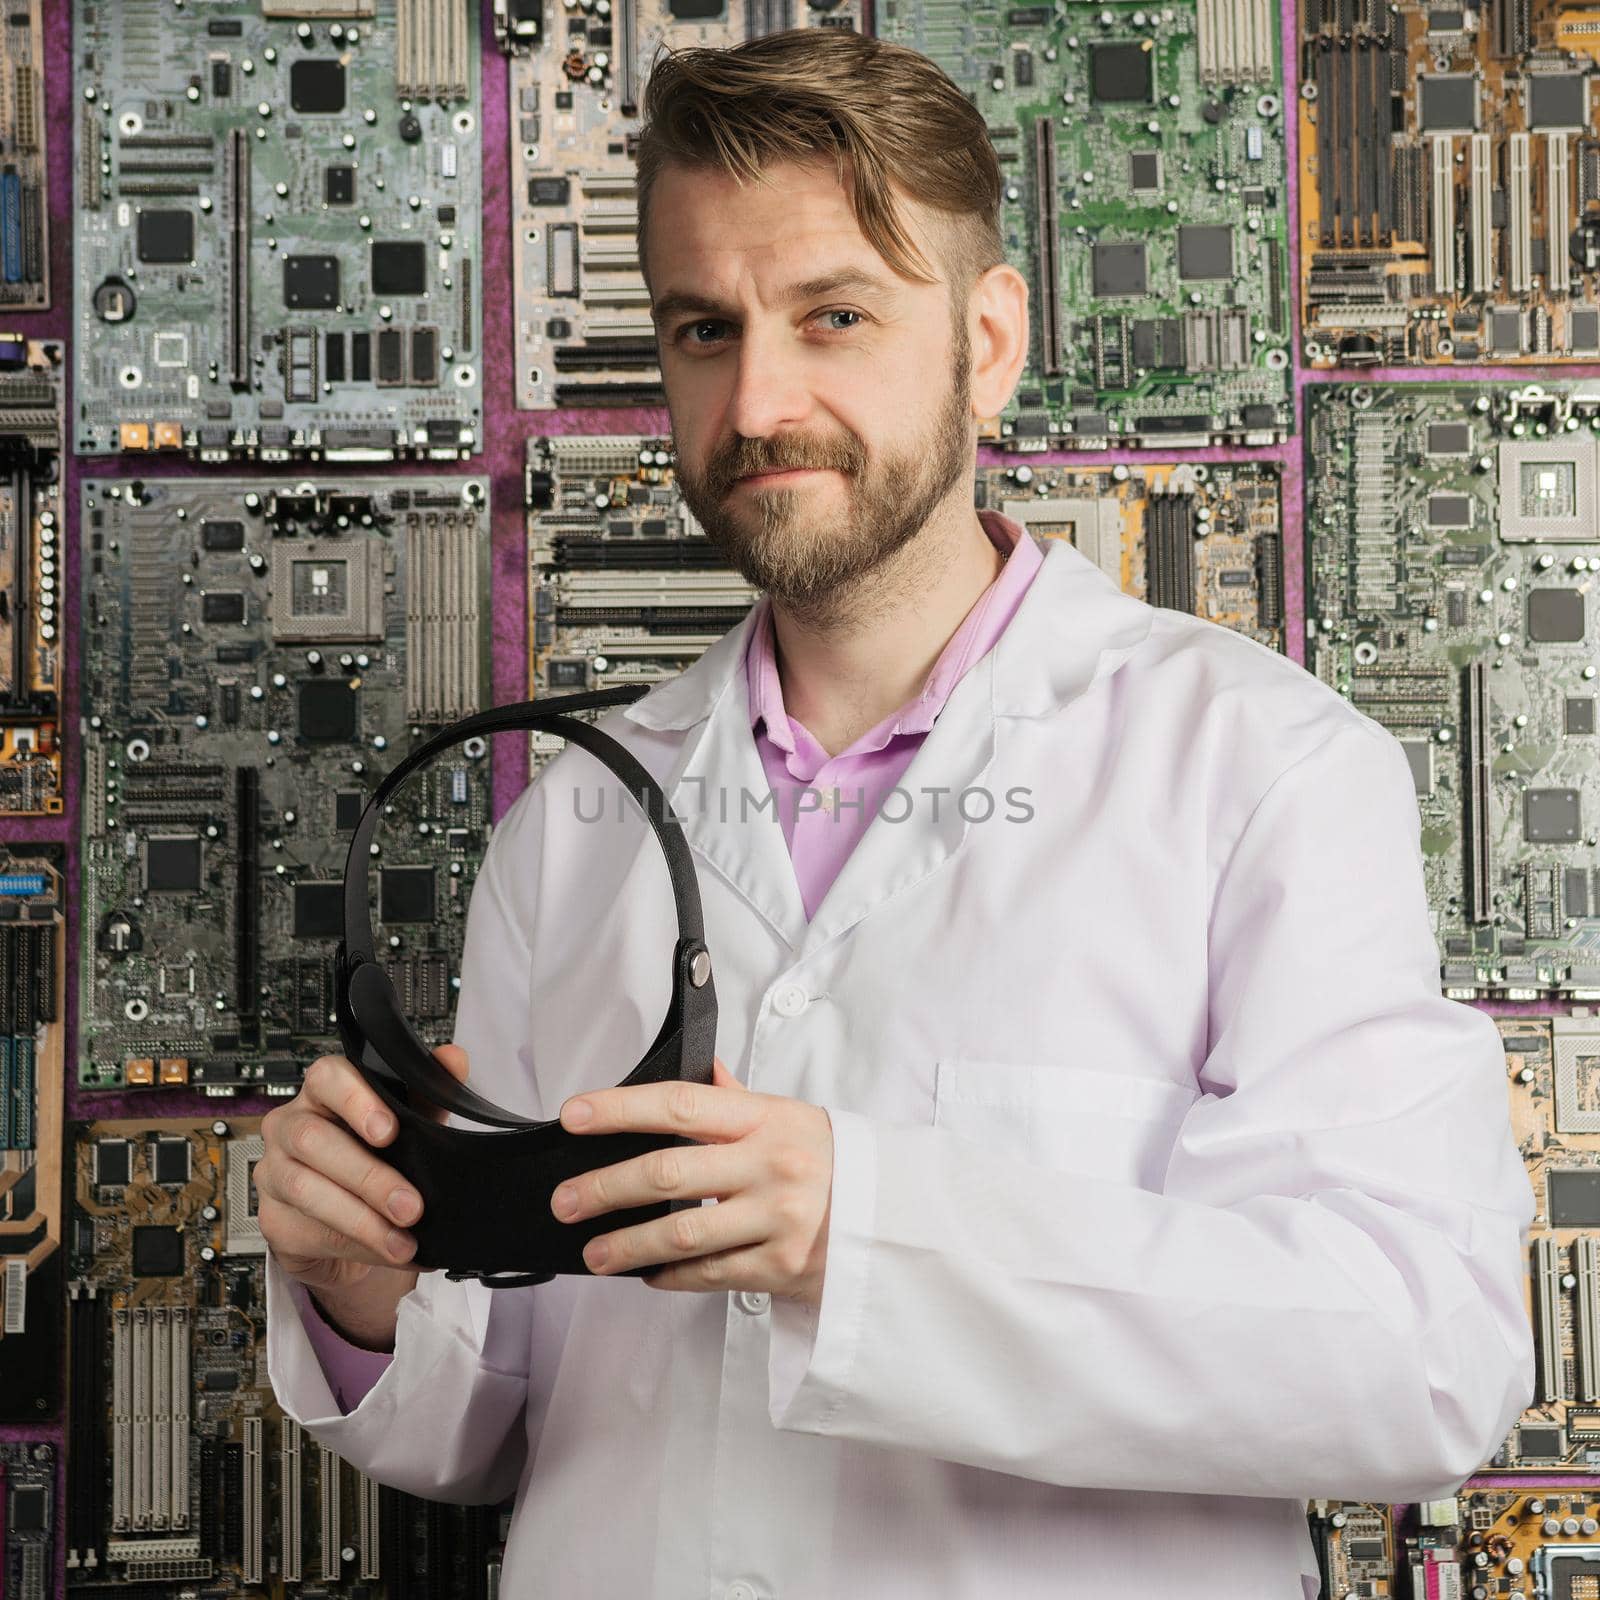 A young electronics engineer stands with a magnifying glass in his hands near the wall of motherboards.